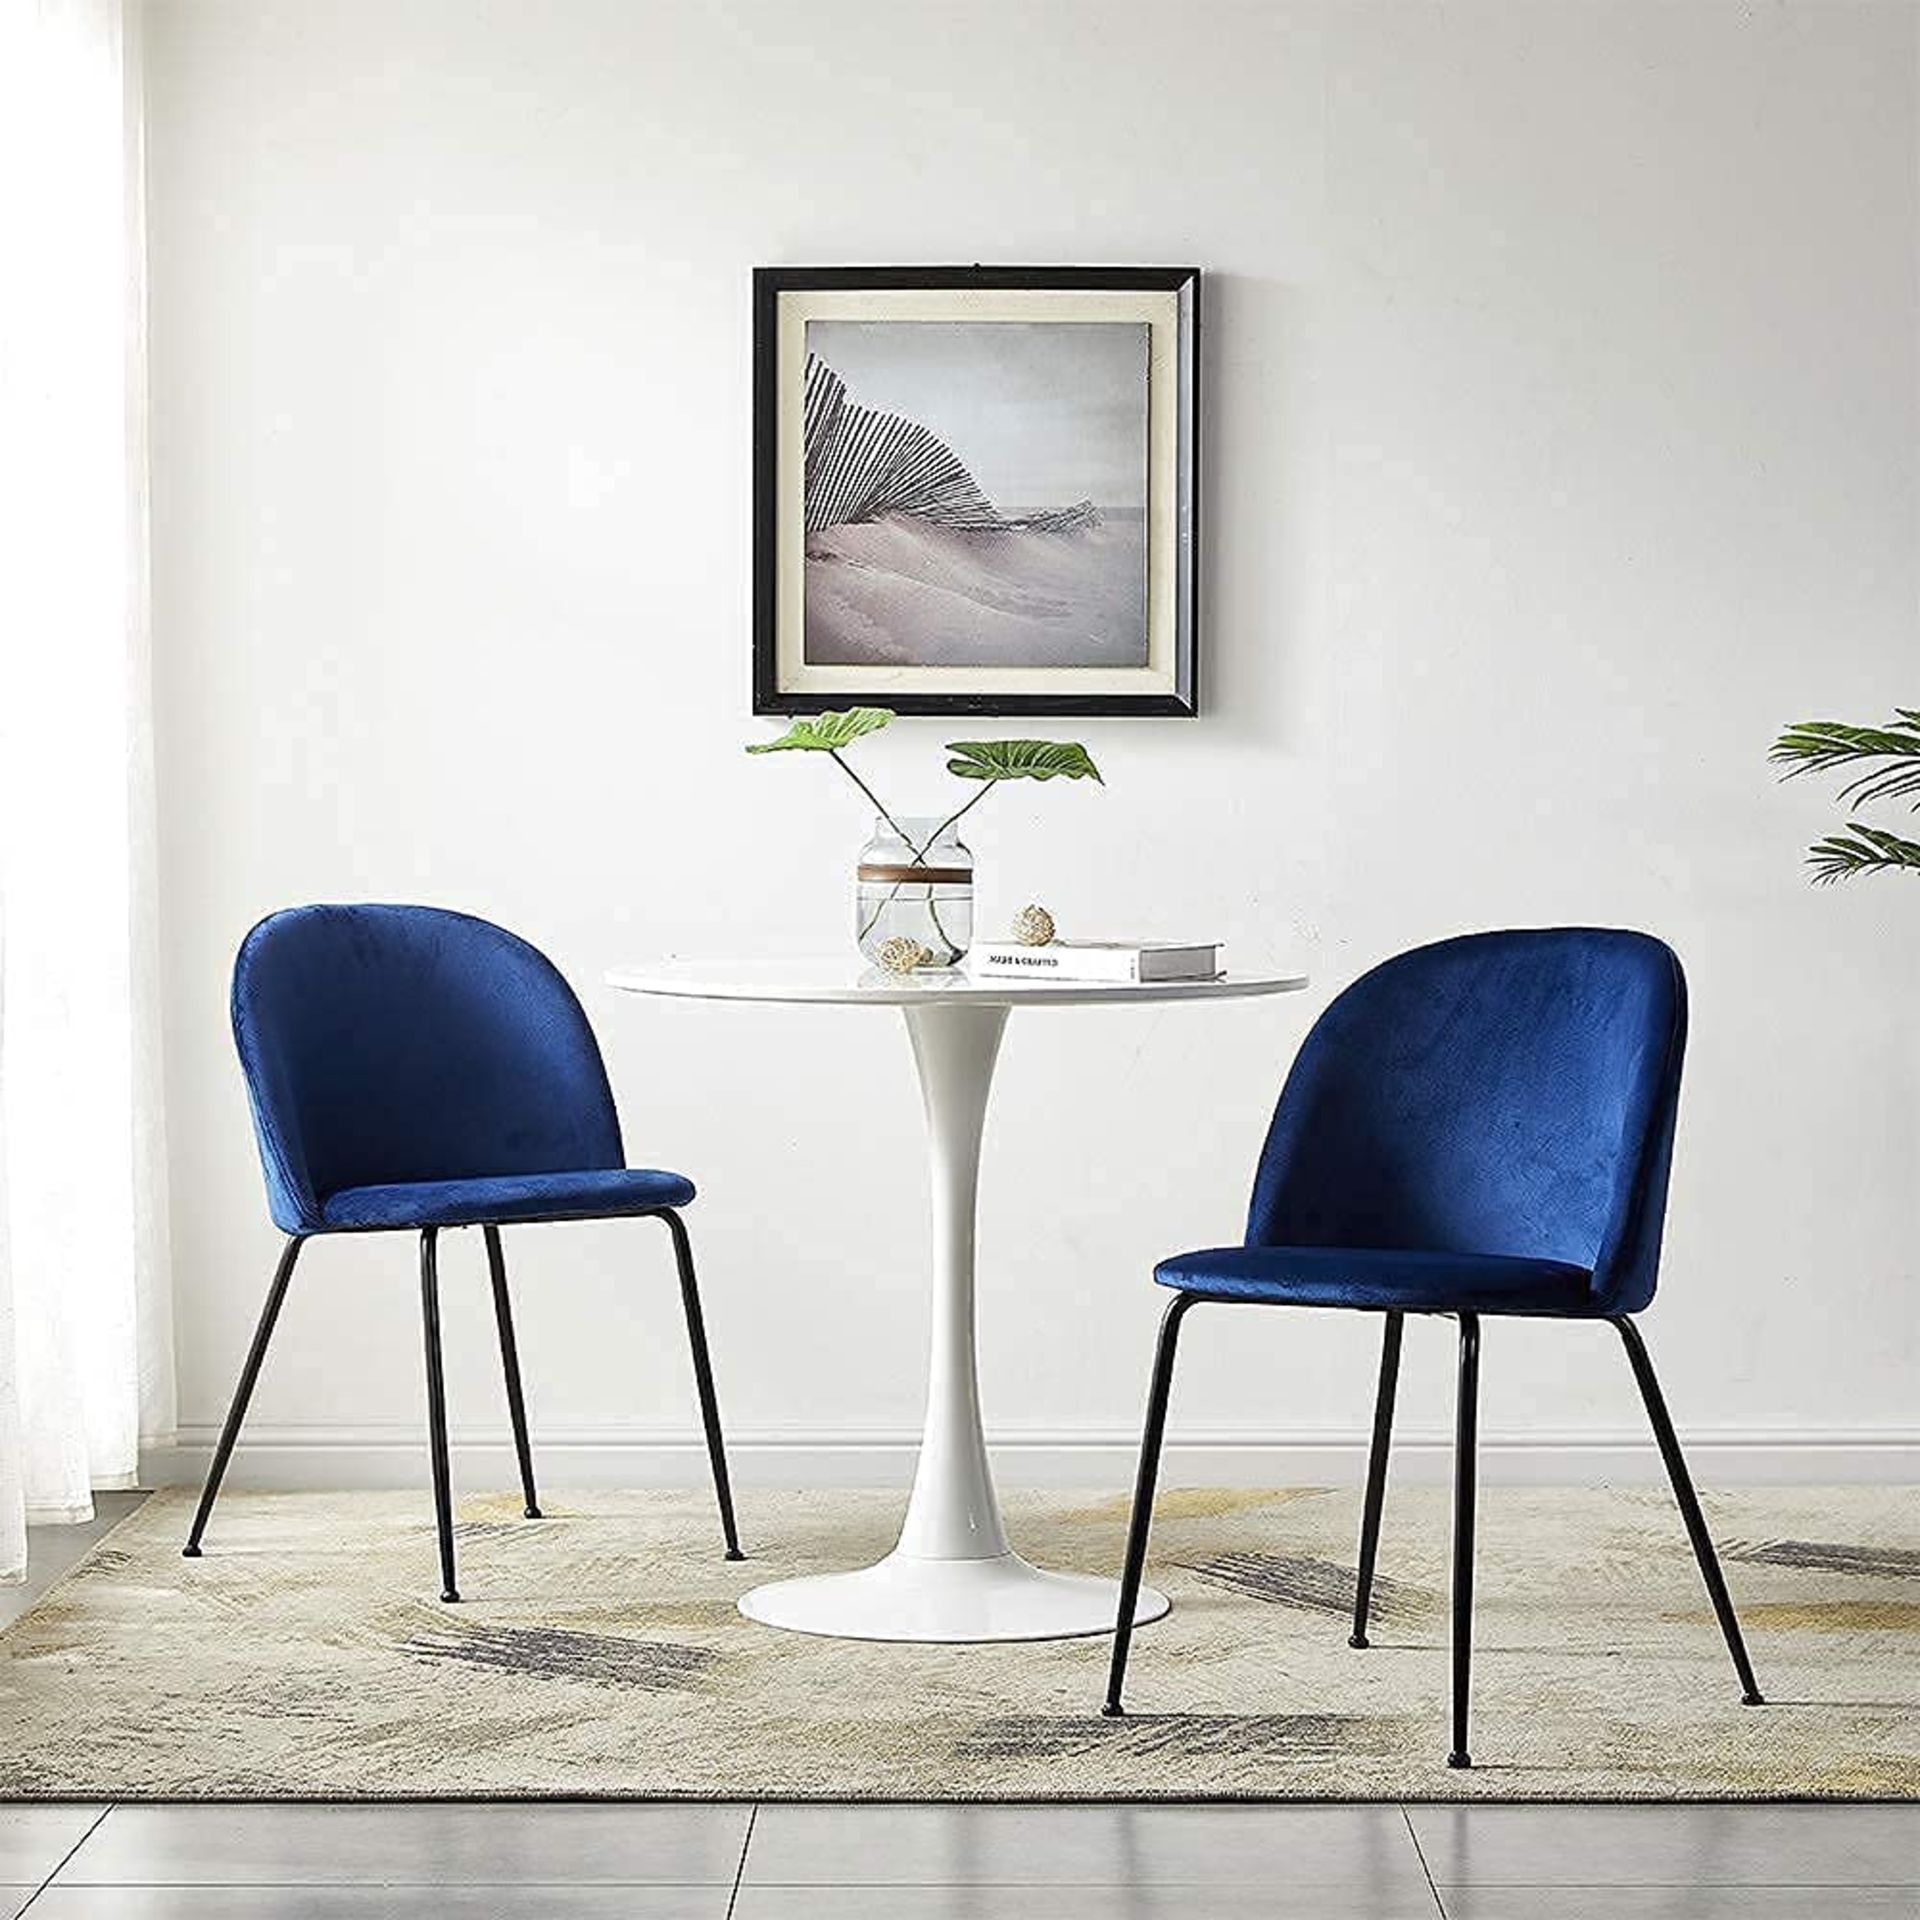 New Boxed - LeChamp Set of 2 Blue Velvet Dining Chairs with Glossy Metal Legs Accent Vintage